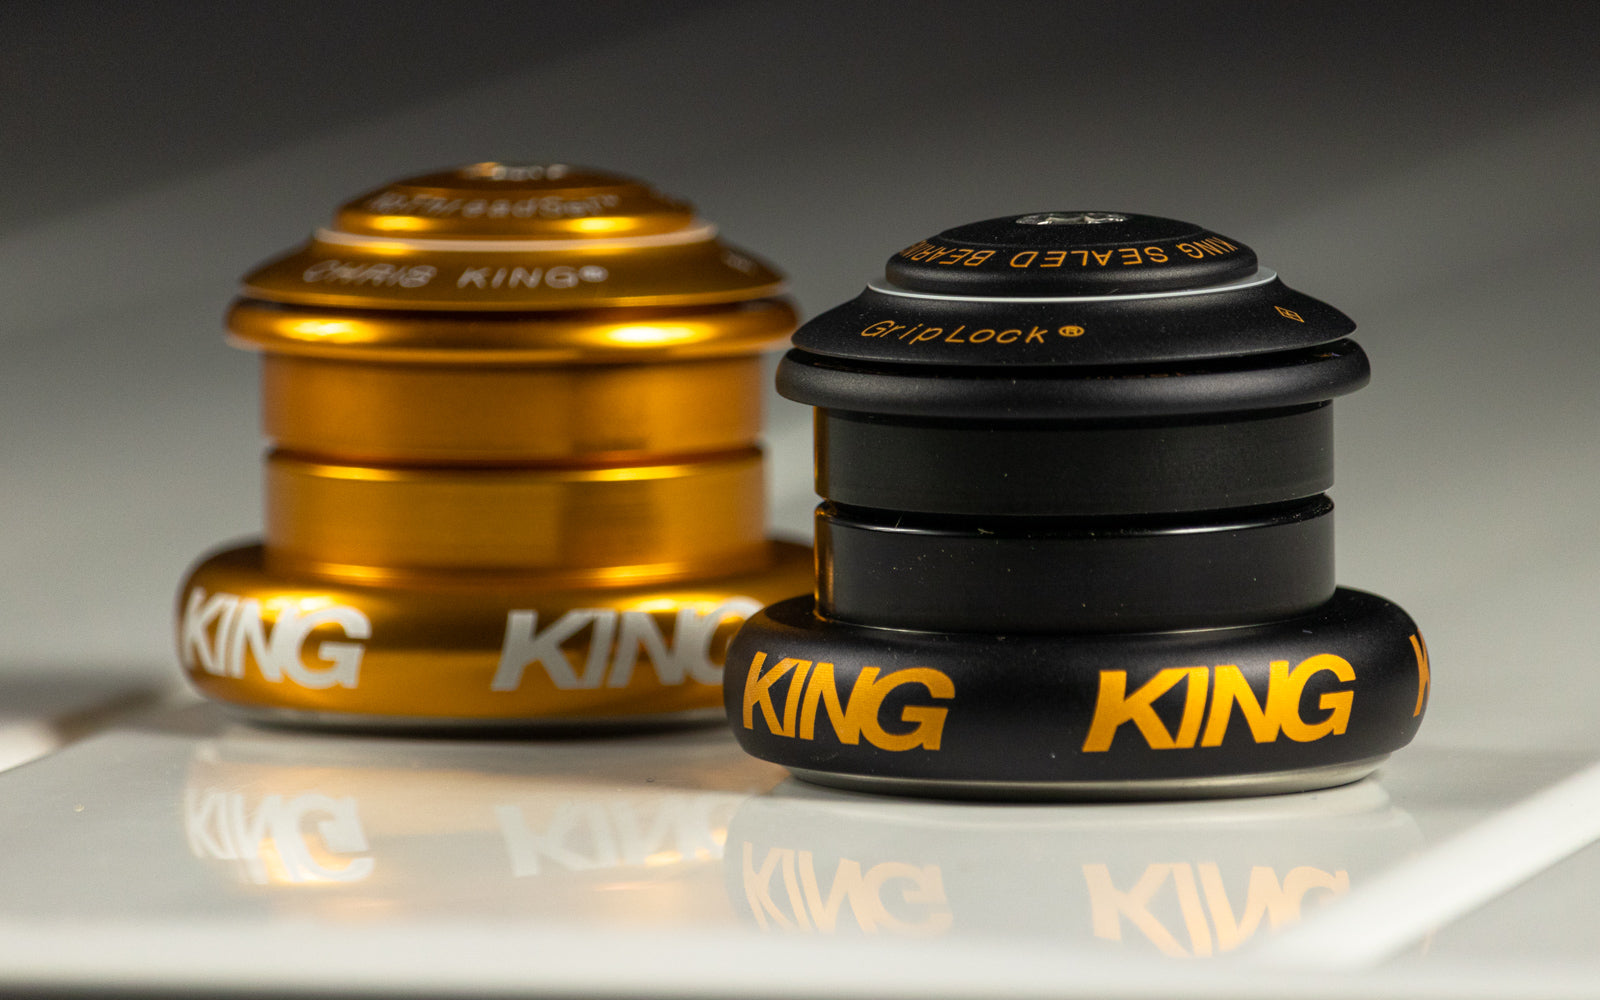 Chris King's New Colors: First Arrivals